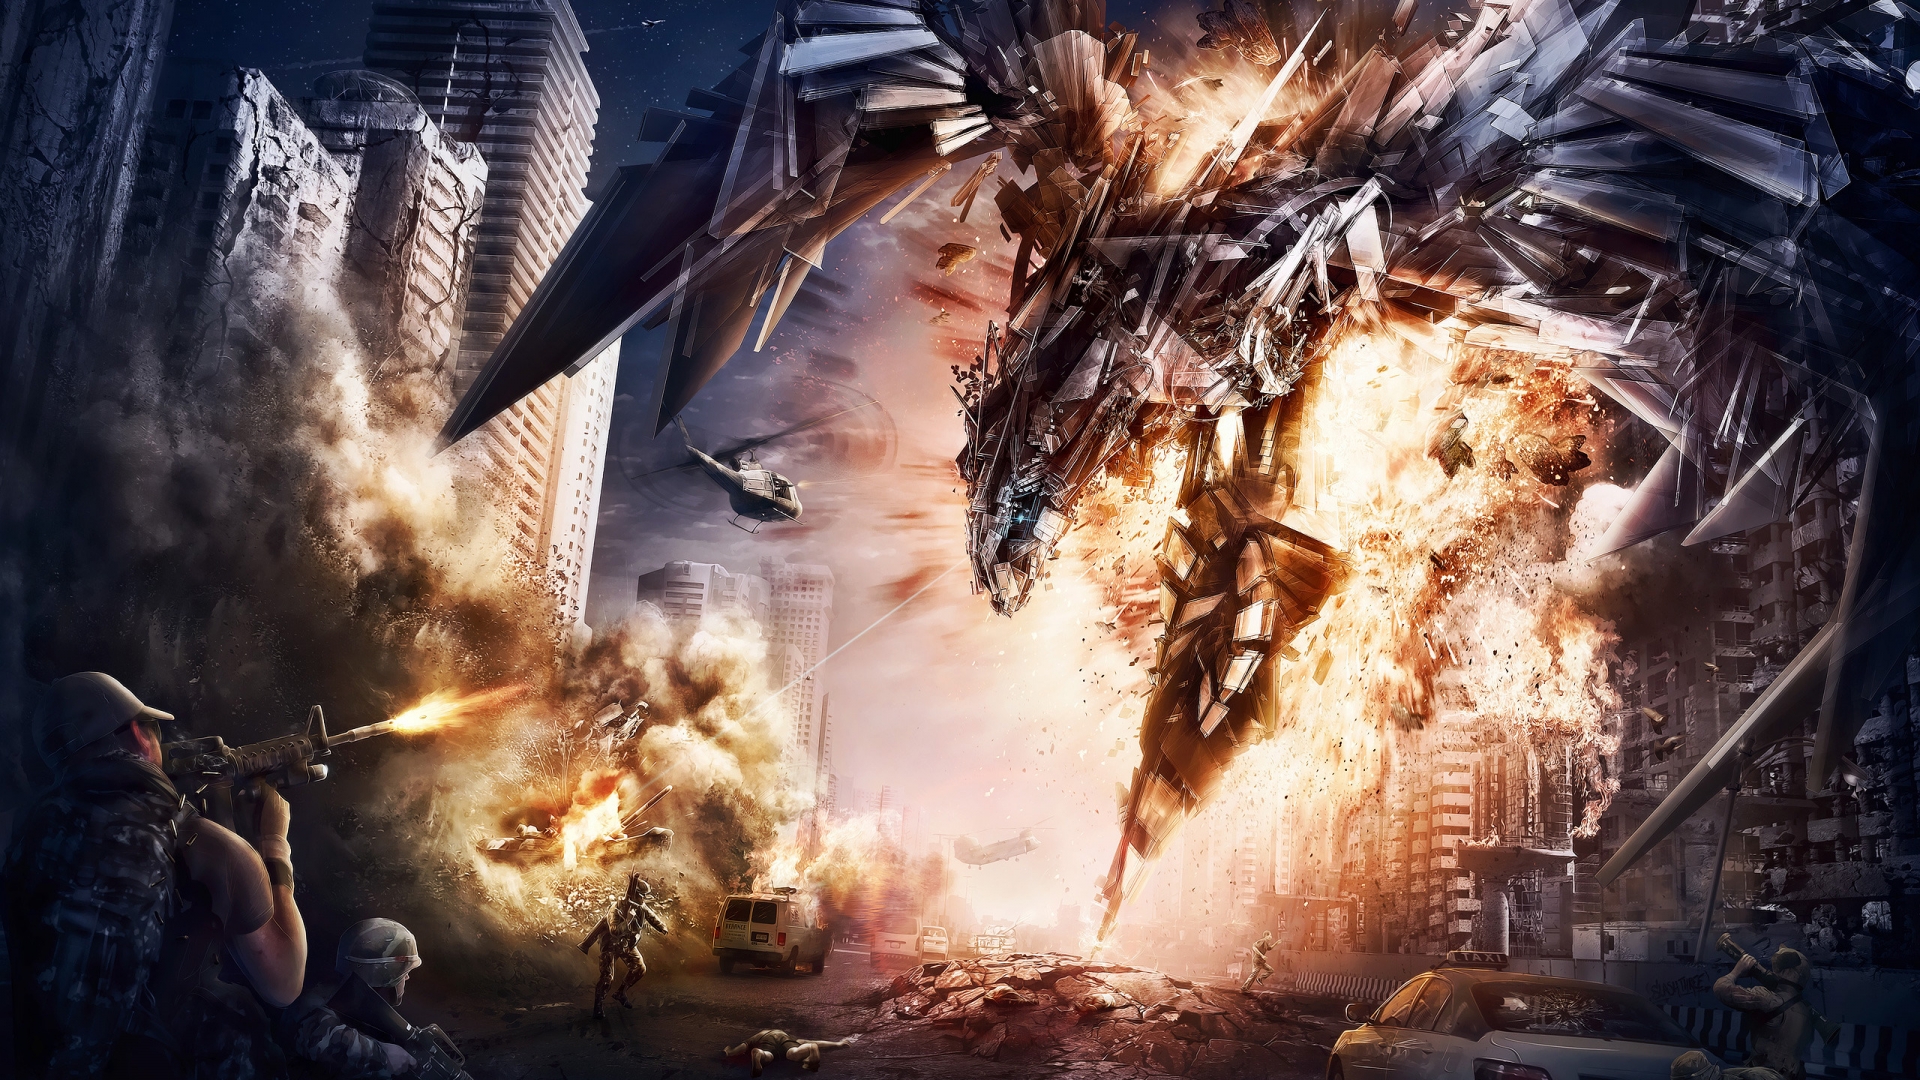 Transformers 4 Concept Art for 1920 x 1080 HDTV 1080p resolution